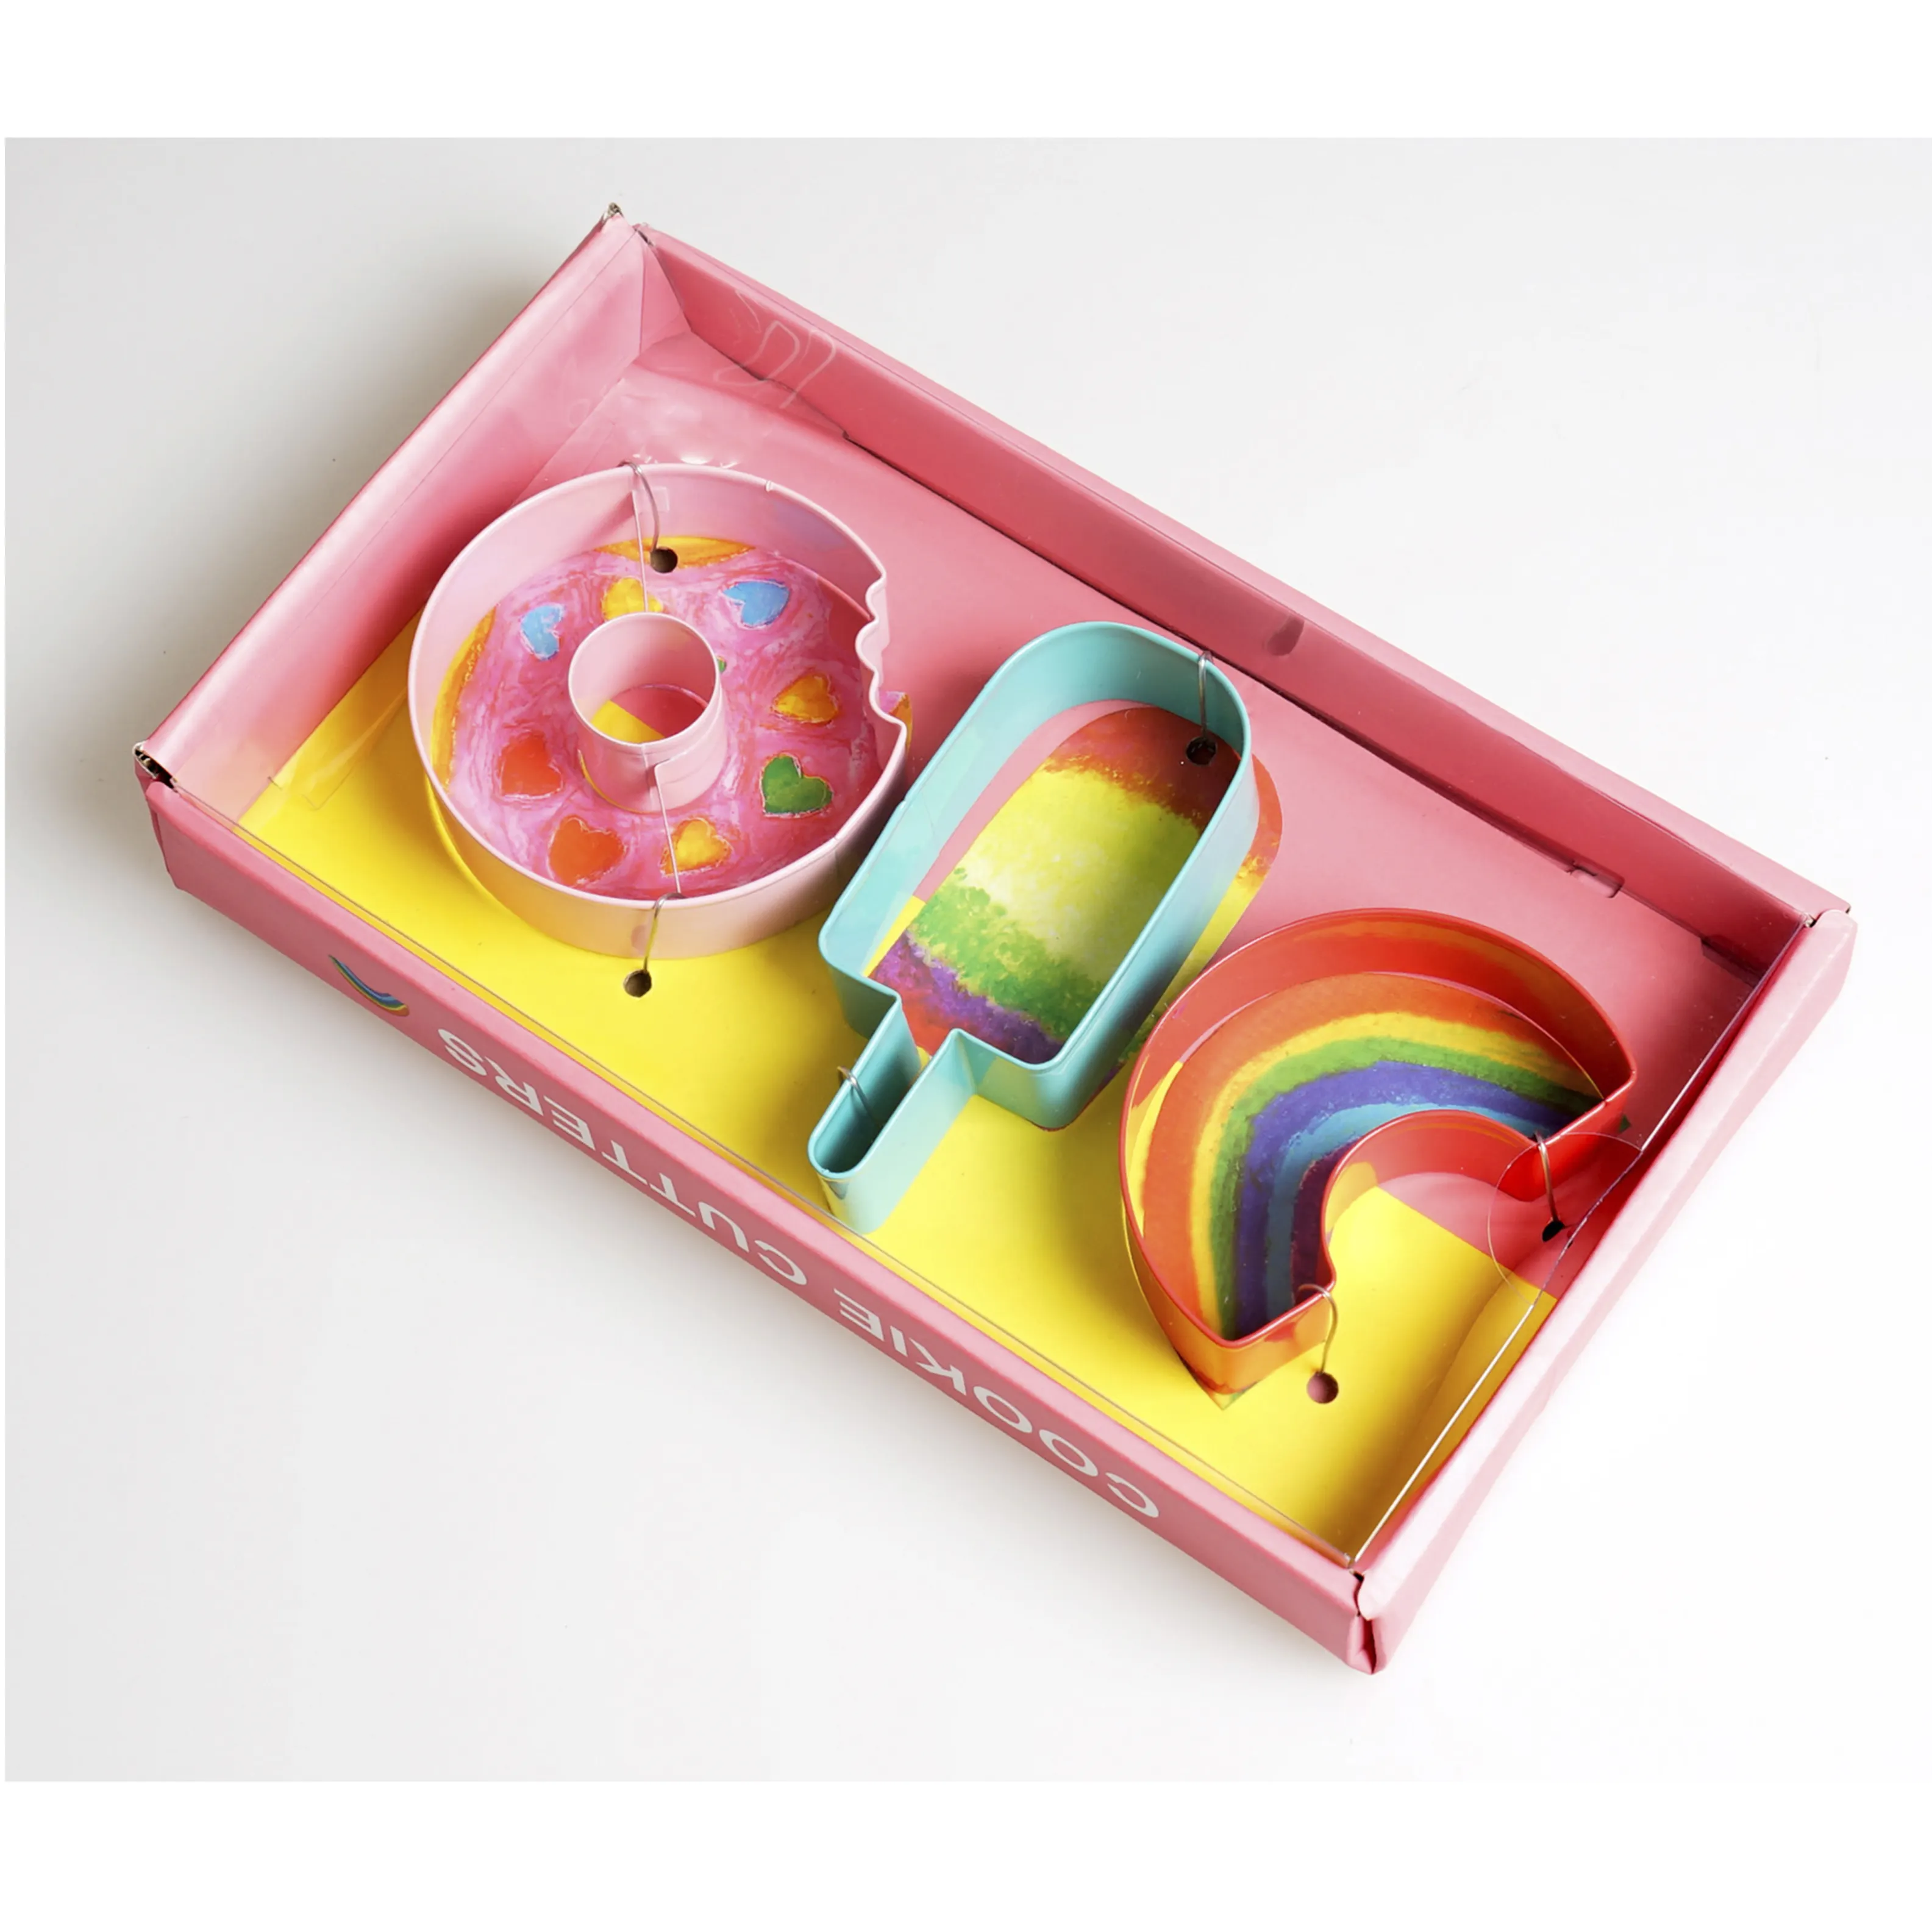 2023 new product Summer Fun Series Stainless Steel Powder Coating Cookie Cutter kitchen accessories Kitchen Cake mould